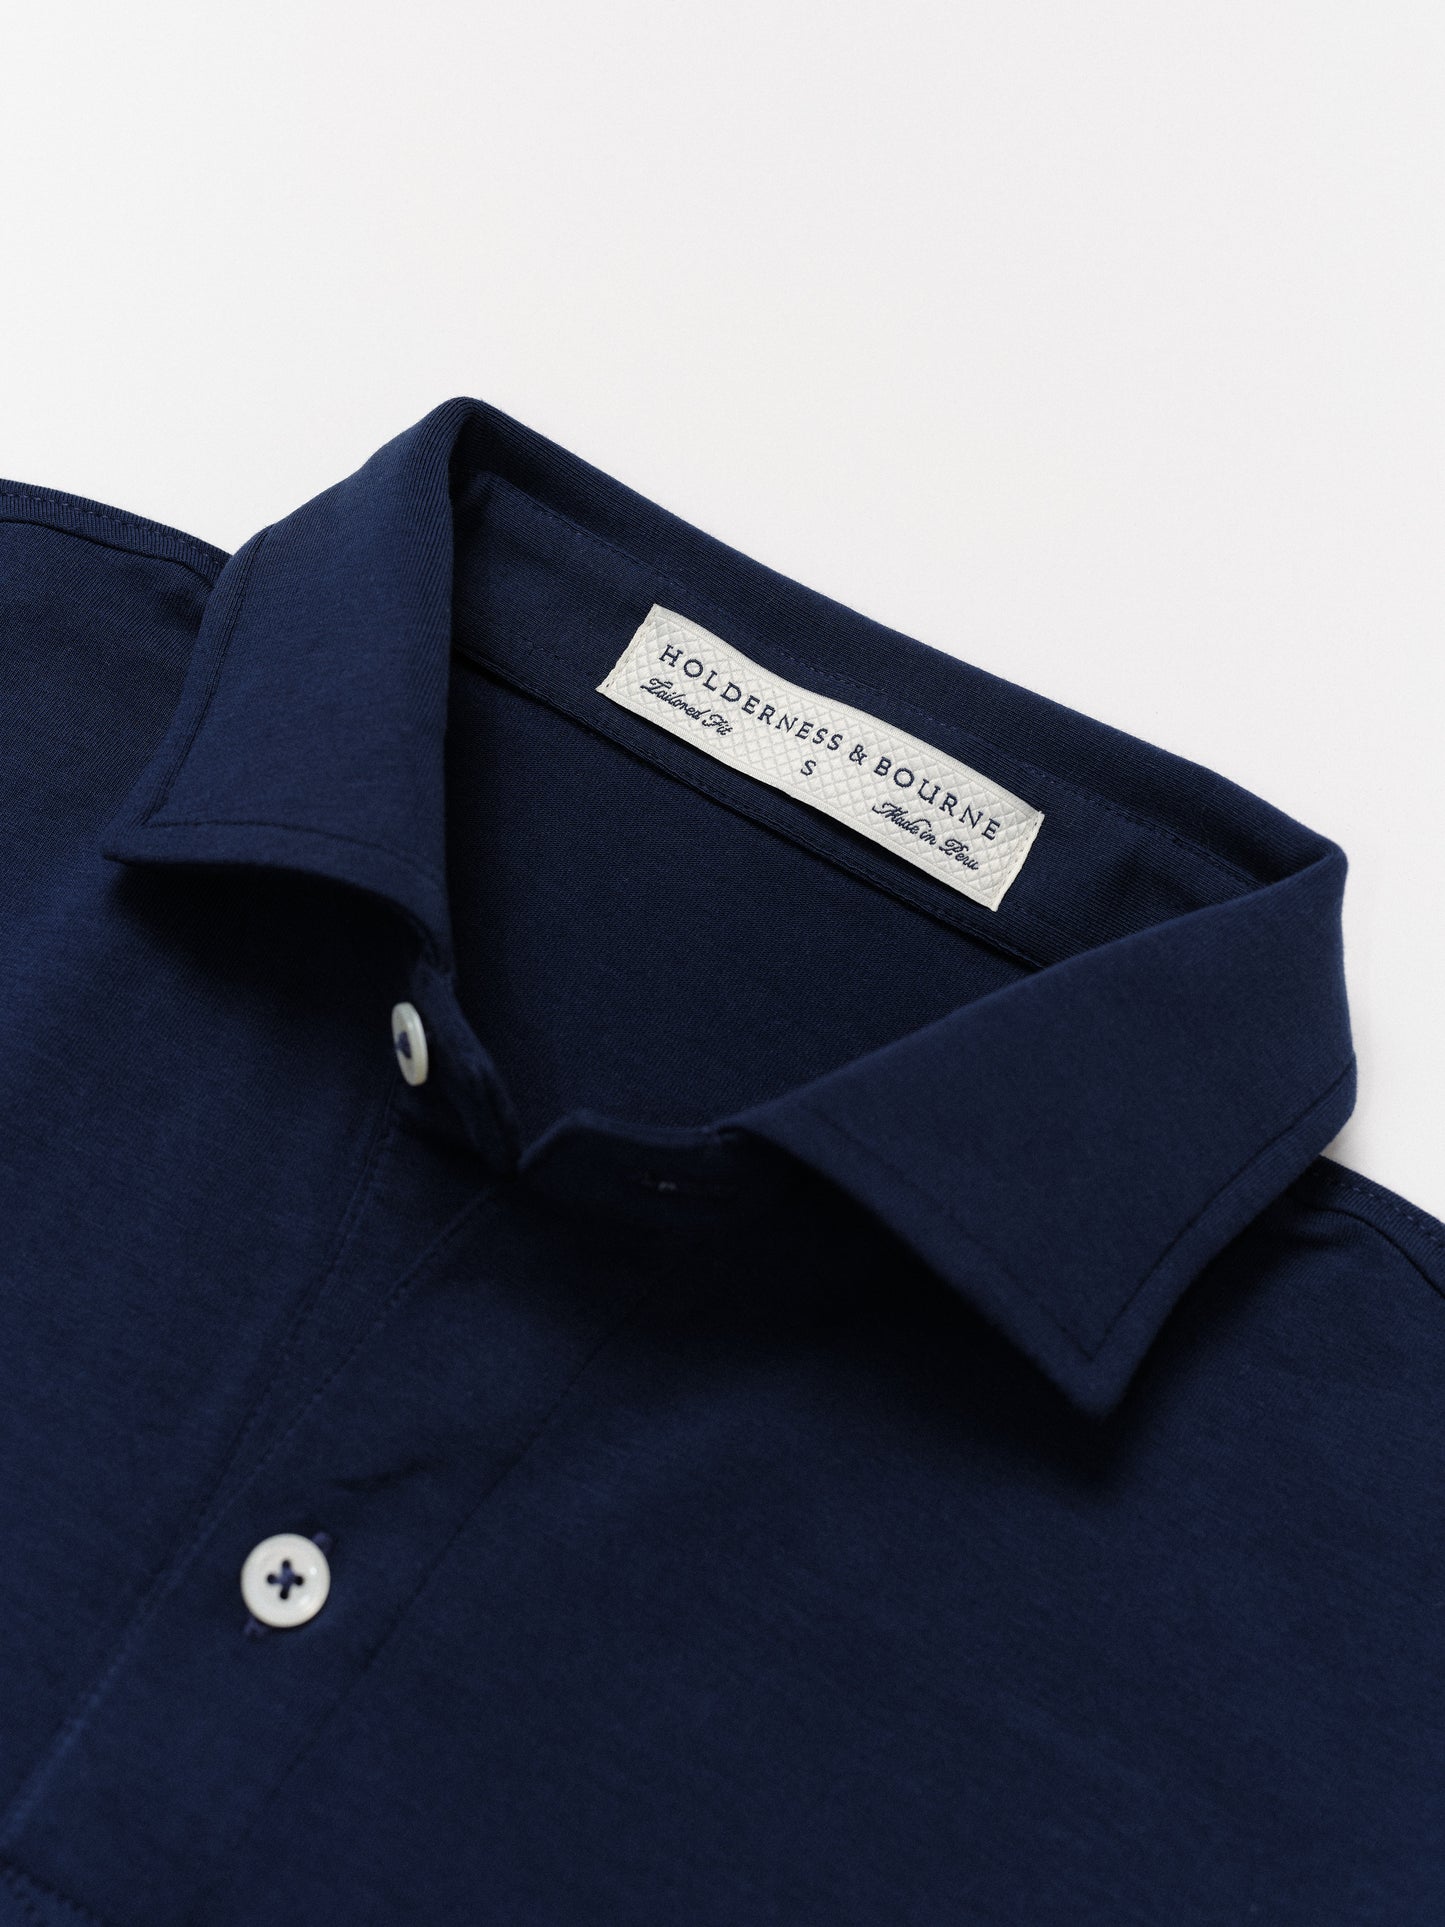 Holderness & Bourne Cotton Polo Shirt in Navy